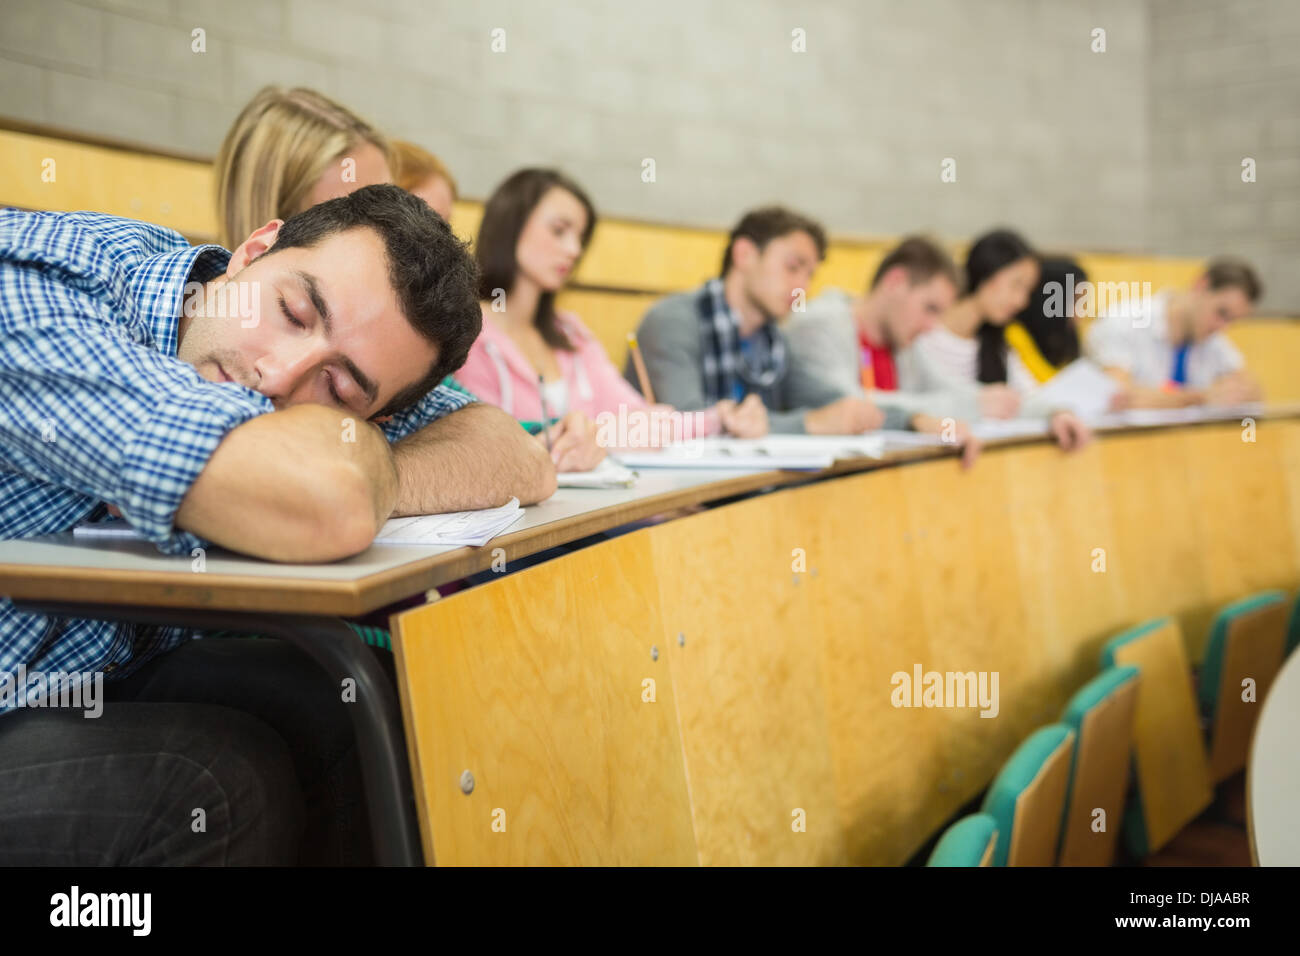 Male sleeping with students in lecture hall Stock Photo